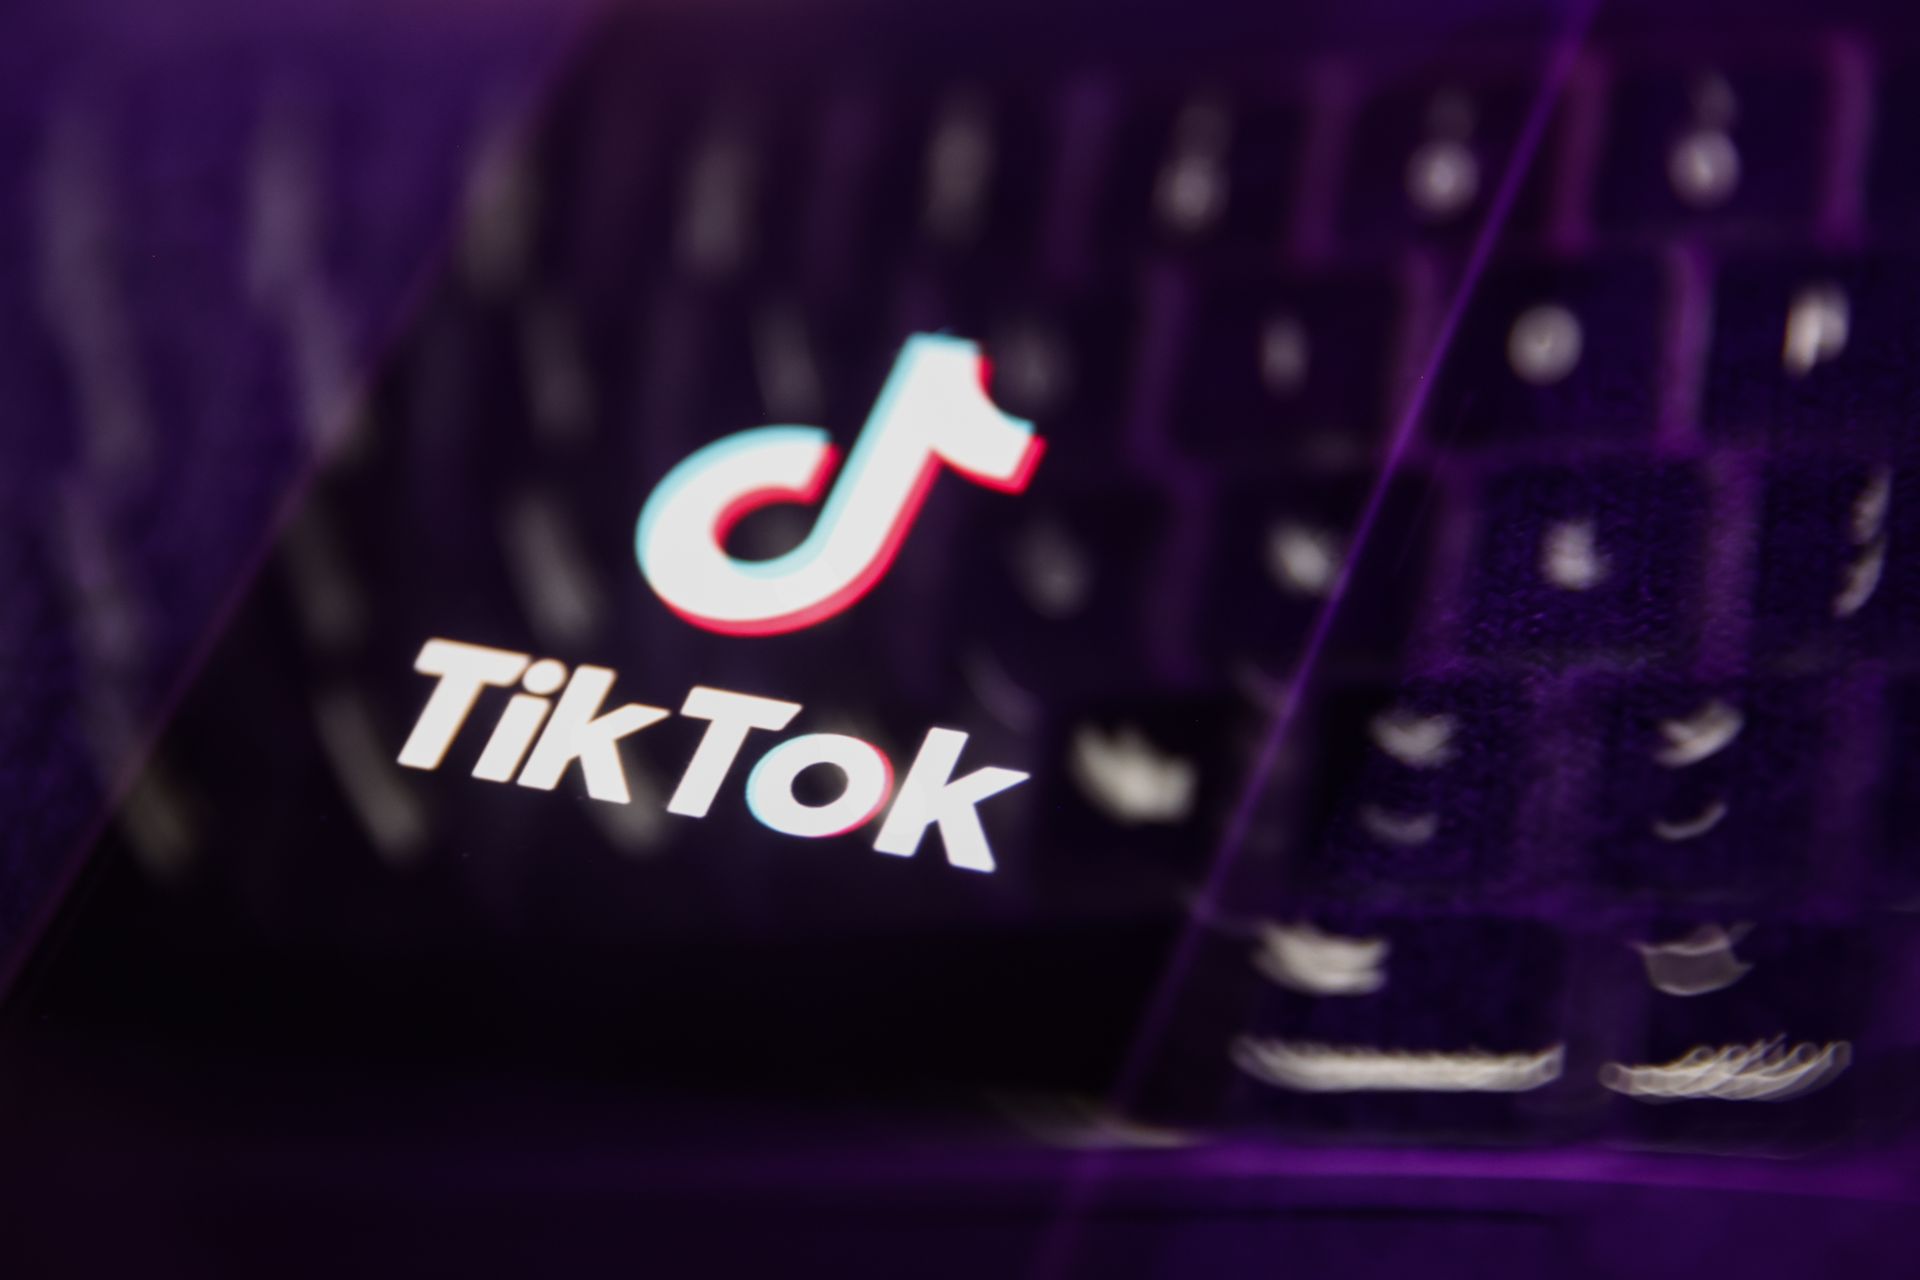 Does TikTok give China too much power and information?